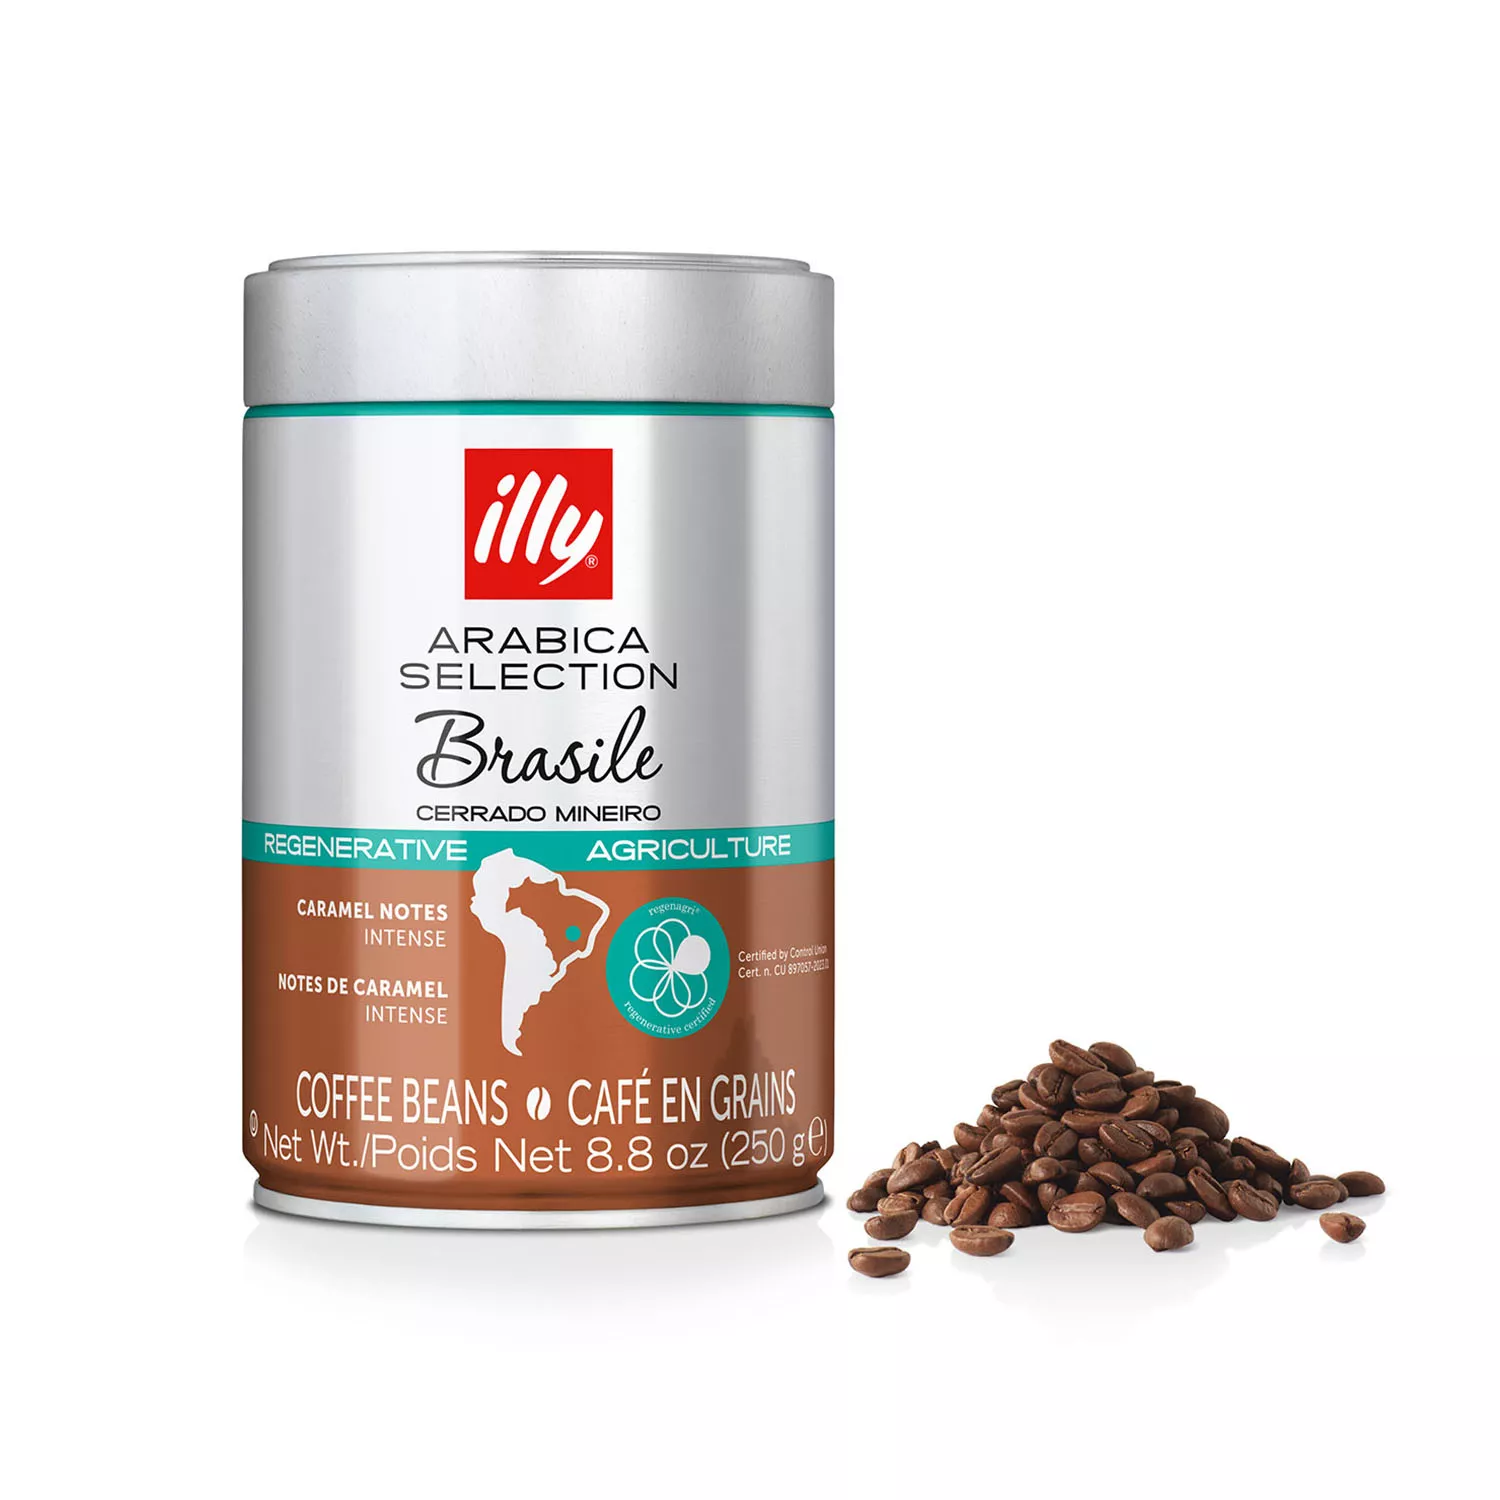 Illy Brazilian Regenerative Agriculture Certified Whole-Bean Coffee